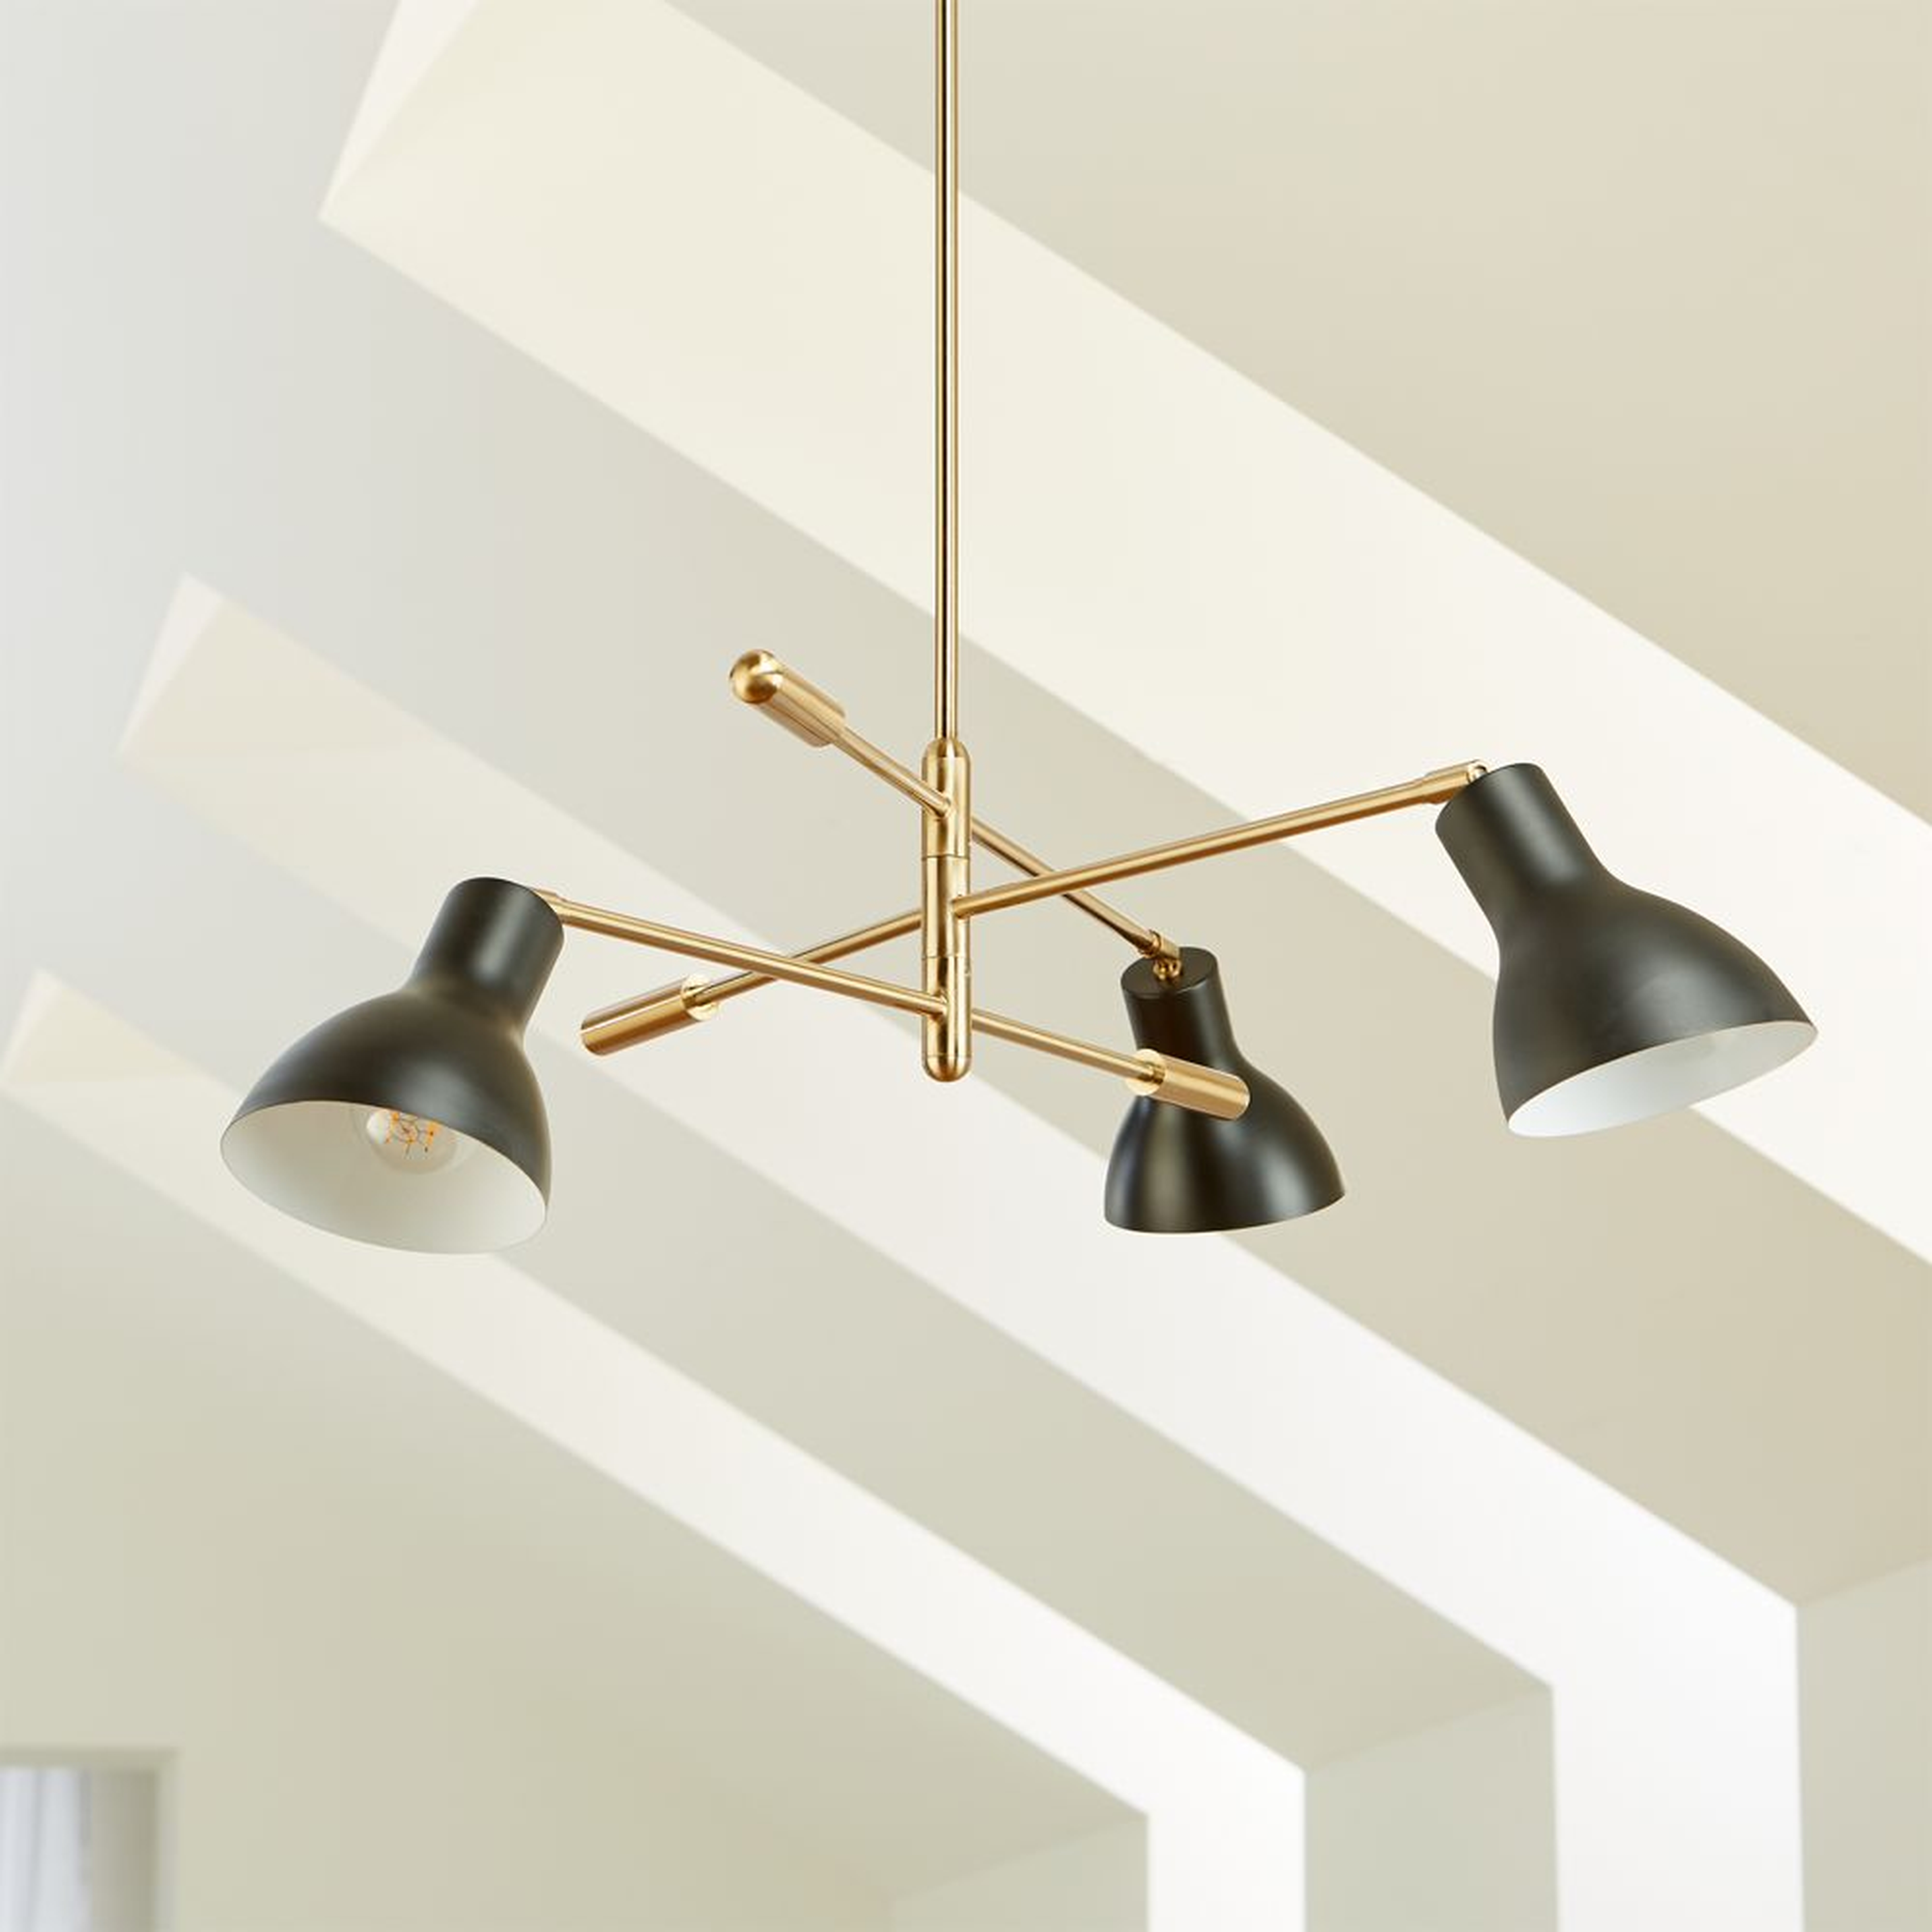 Kace 3 Arm Chandelier - Crate and Barrel